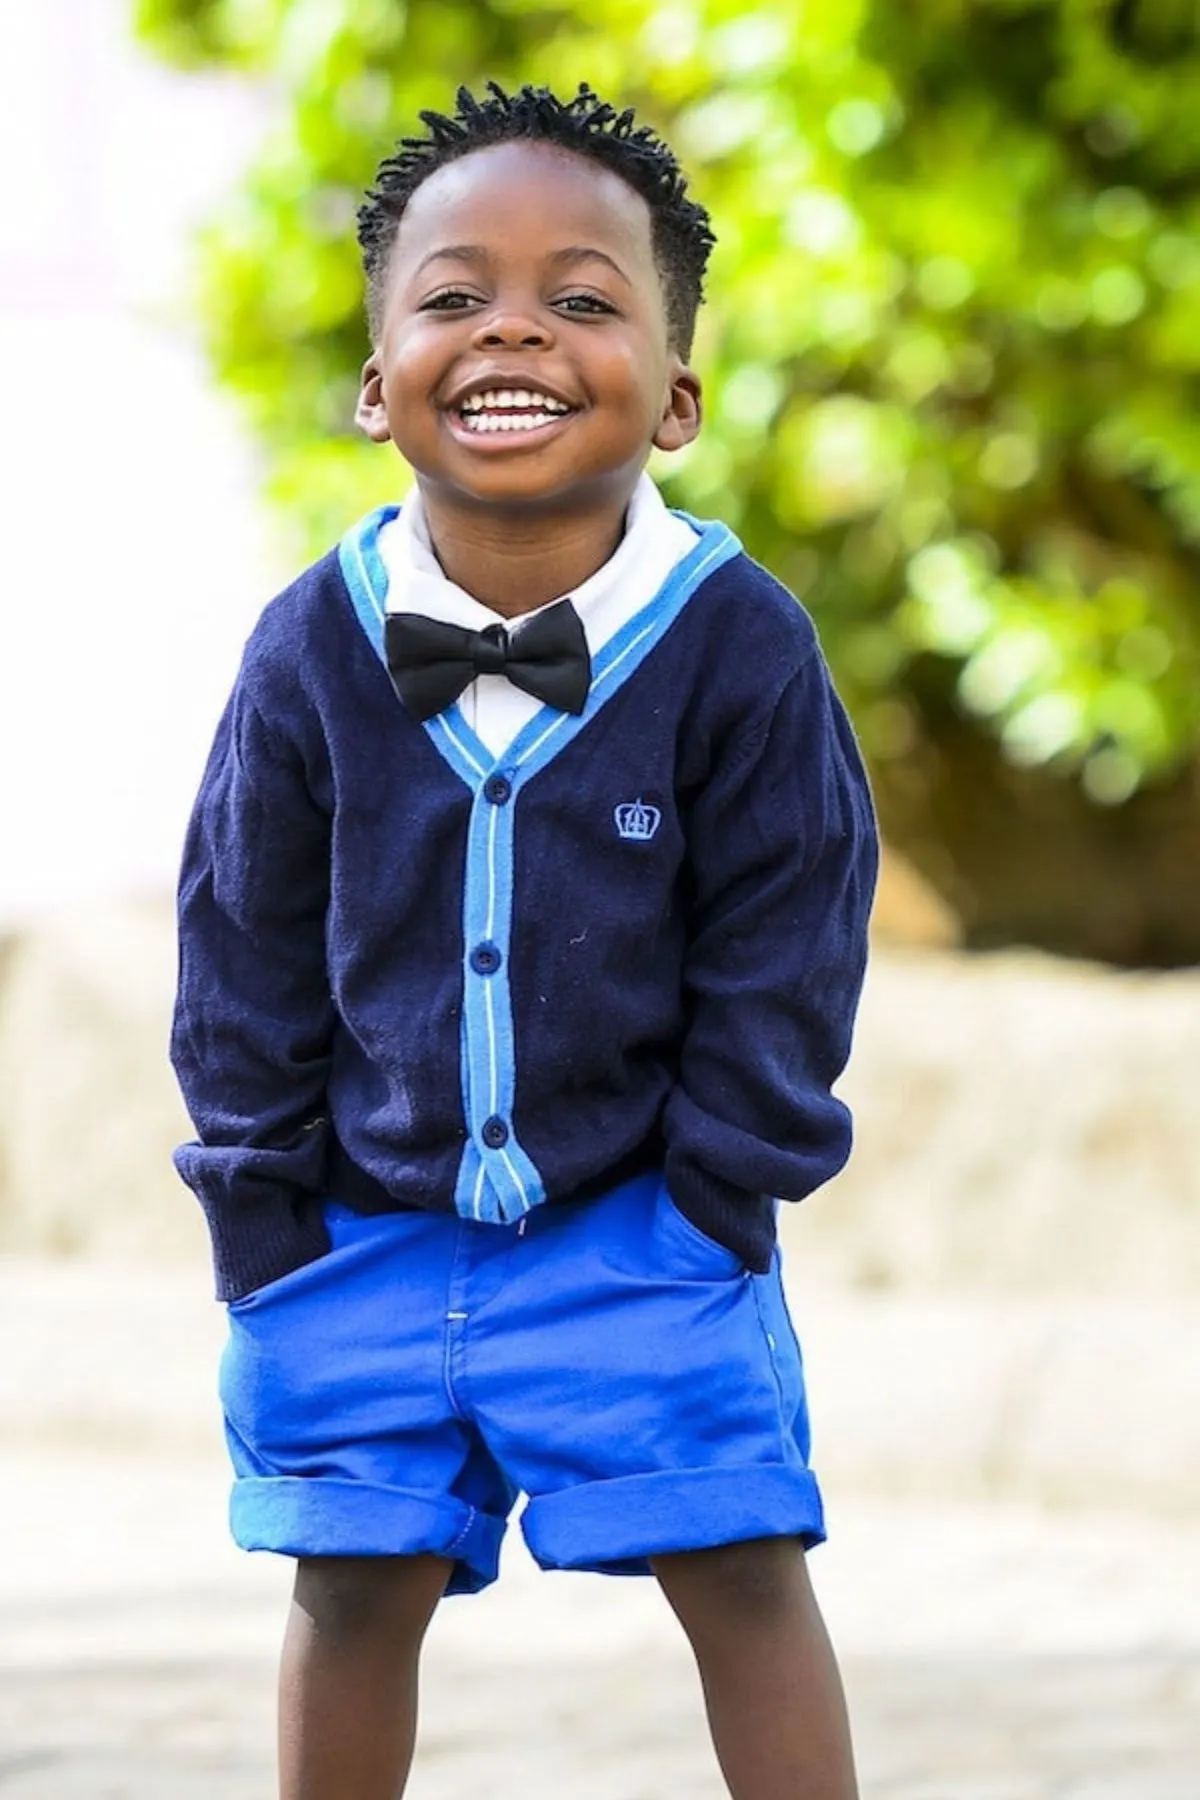 Smiling boy in a blue sweater, shorts, and bowtie, standing outside.